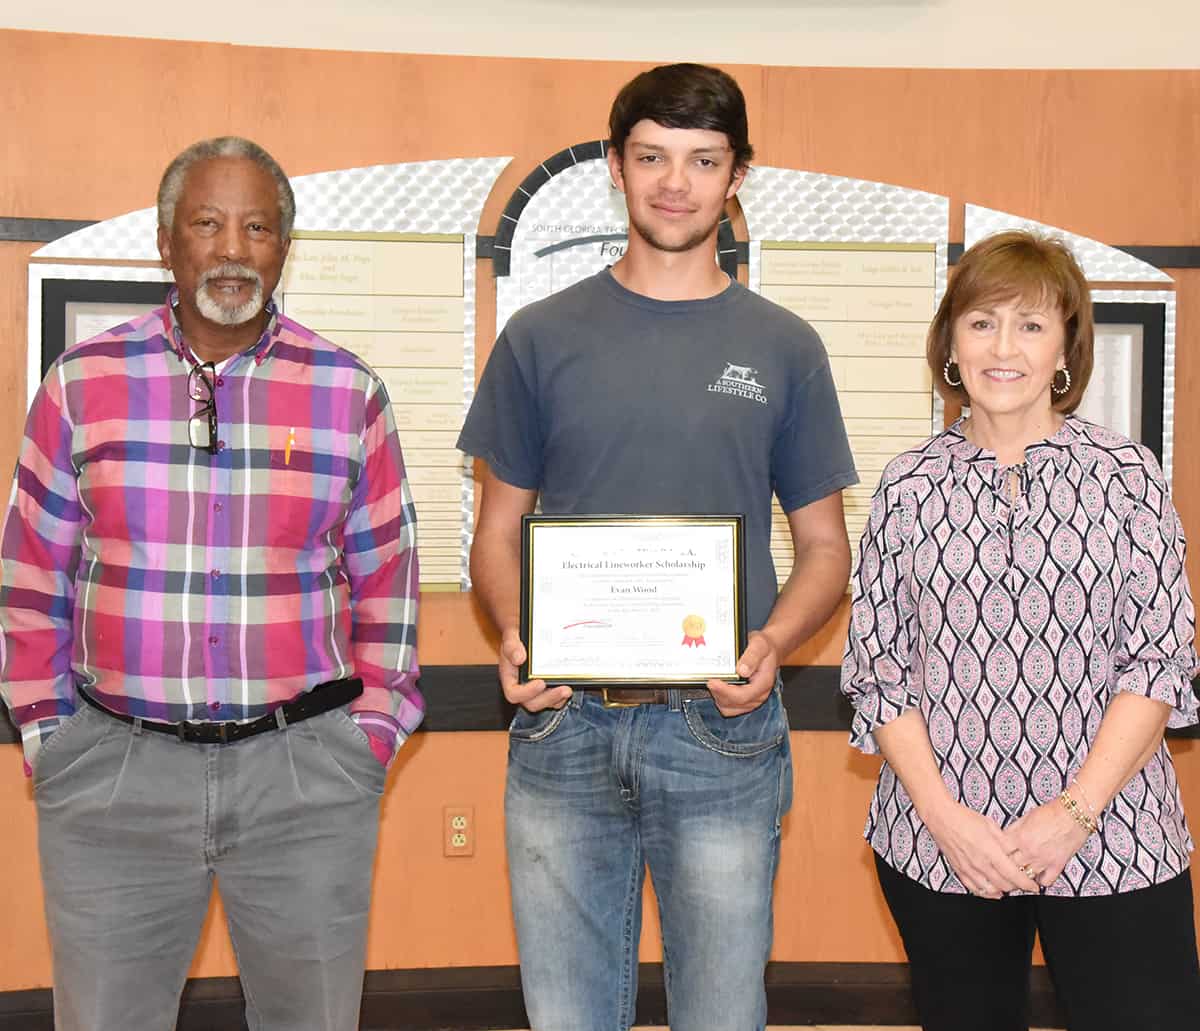 South Georgia Technical College Electrical Lineworker instructor Sidney Johnson is shown above with Evan Wood, who was presented with the Chattahoochee Flint RESA Electrical Lineworker Scholarship by the SGTC Foundation. SGTC’s Partnership Coordinator and Economic Development Assistant Tami Blount is also shown. SGTC Vice President of Institutional Advancement and Executive Director of the SGTC Foundation Su Ann Bird is not shown.